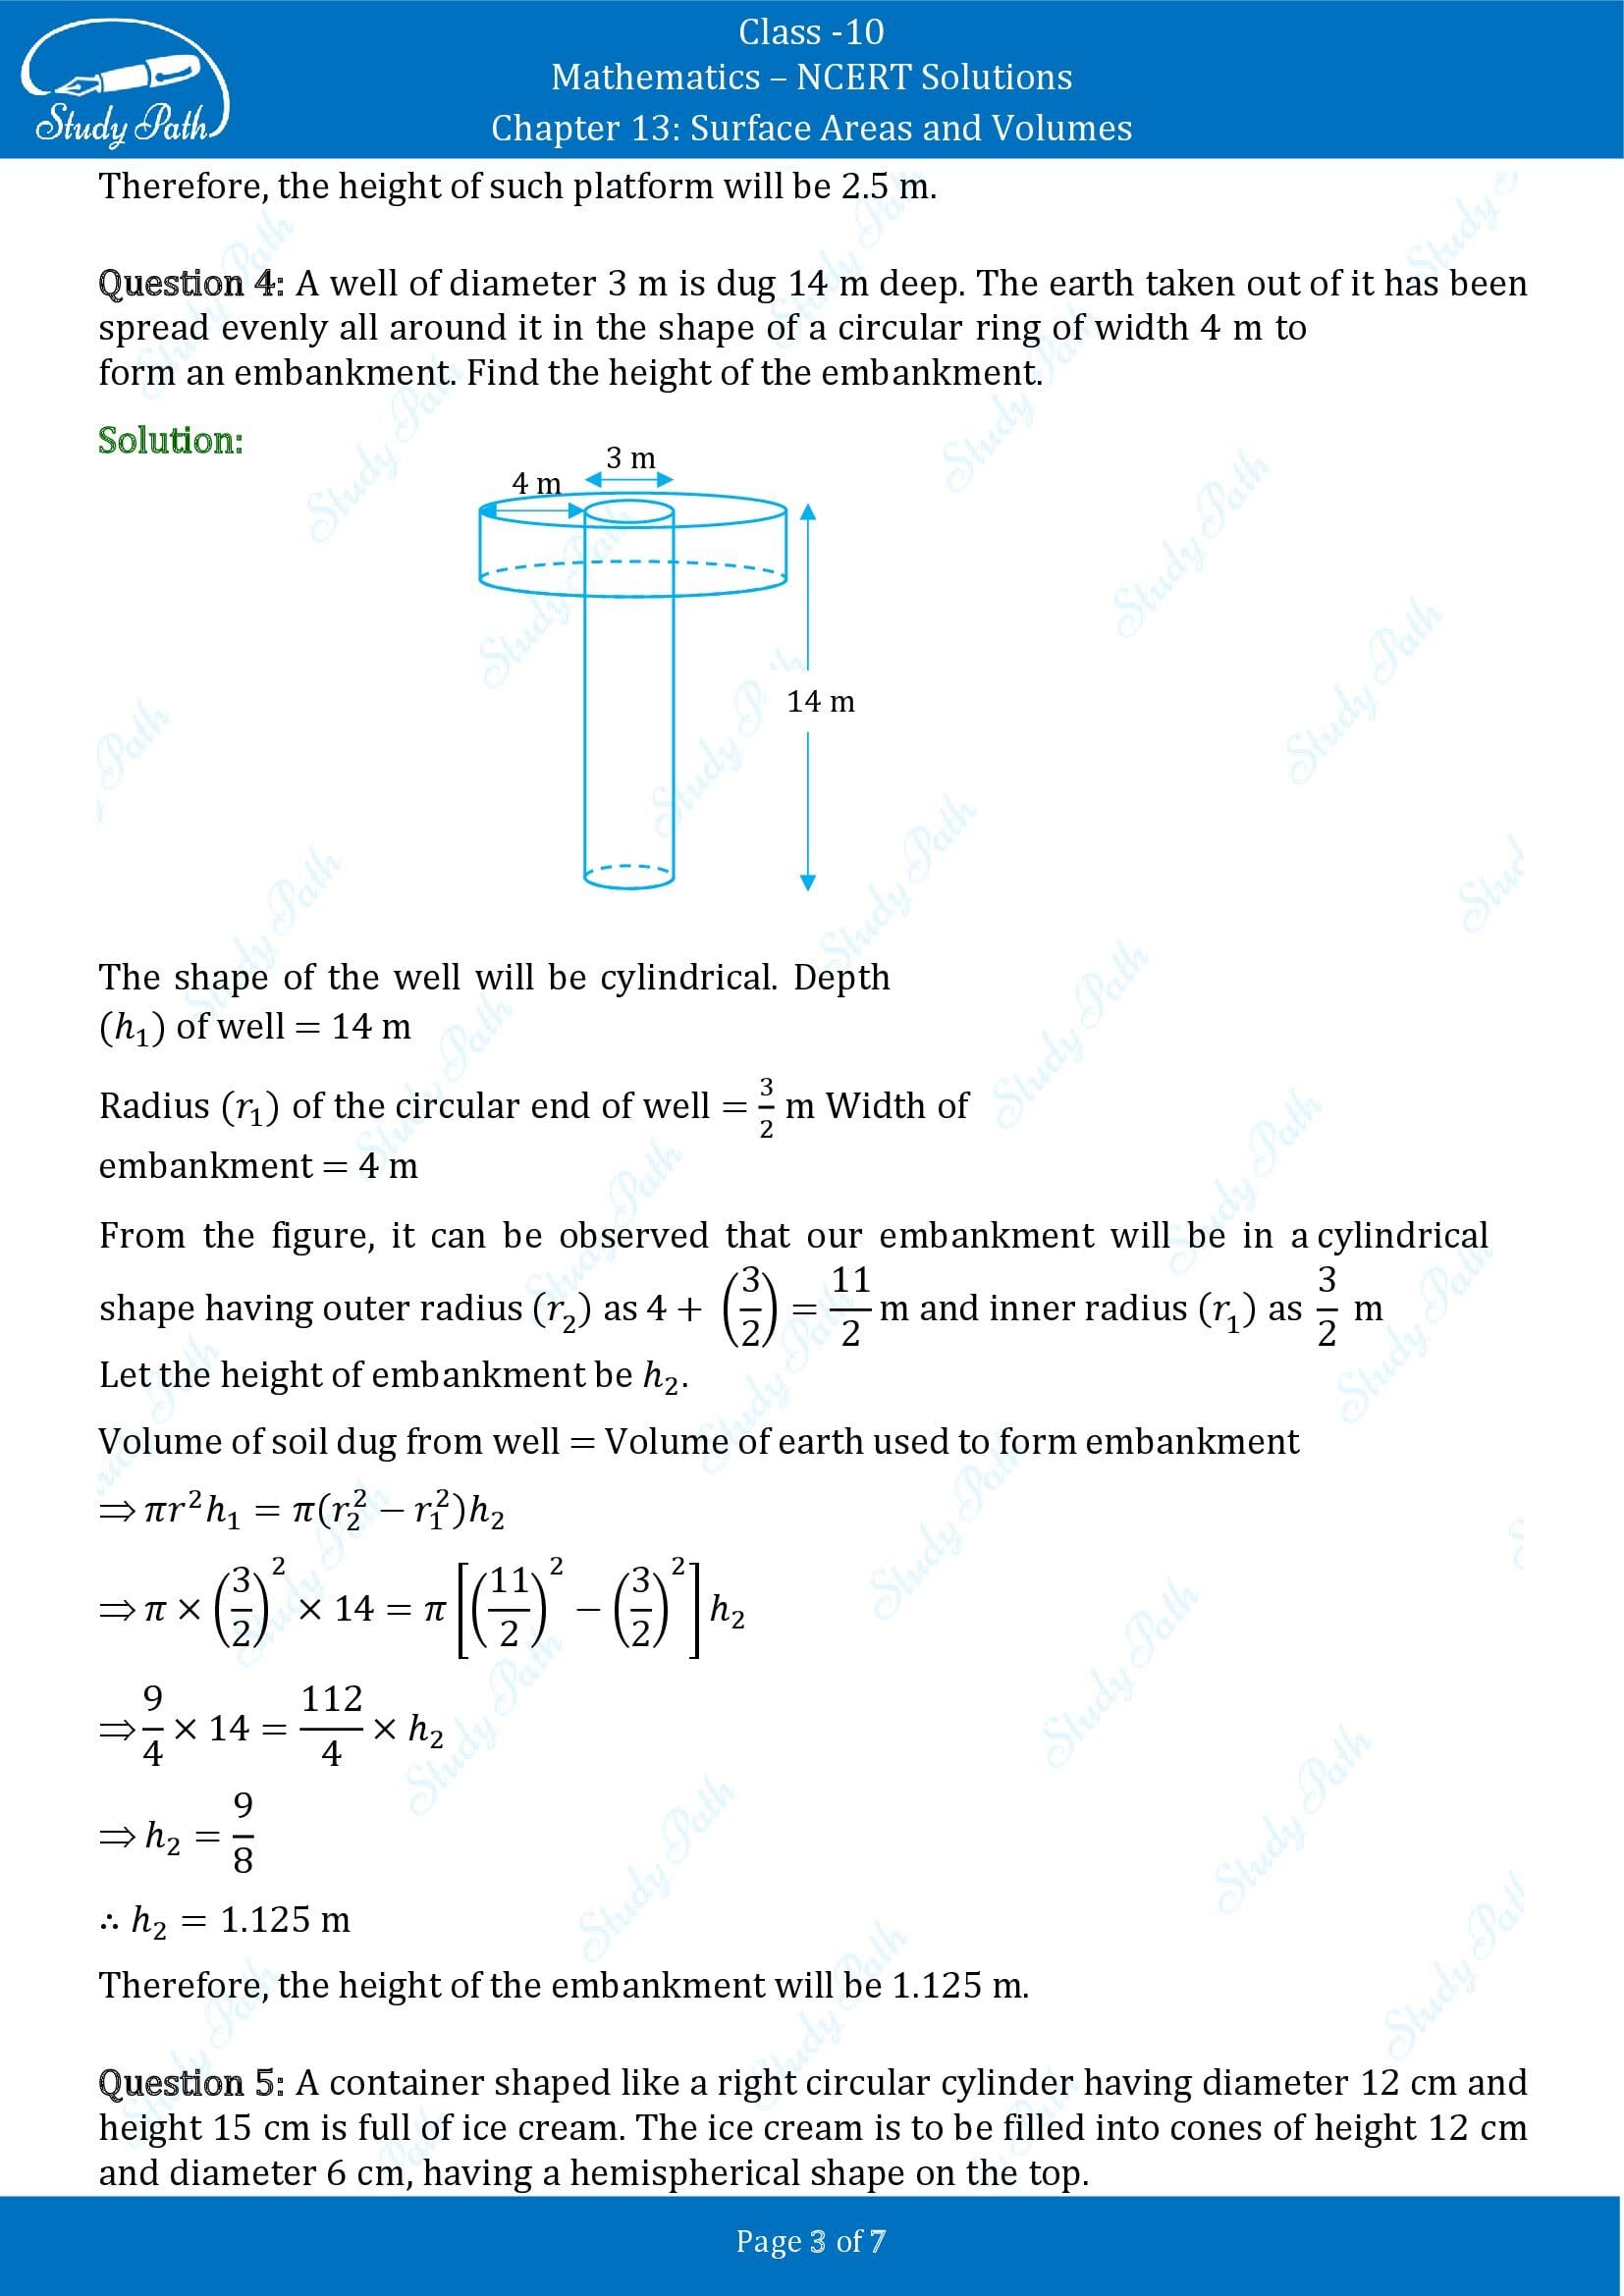 NCERT Solutions for Class 10 Maths Chapter 13 Surface Areas and Volumes Exercise 13.3 00003